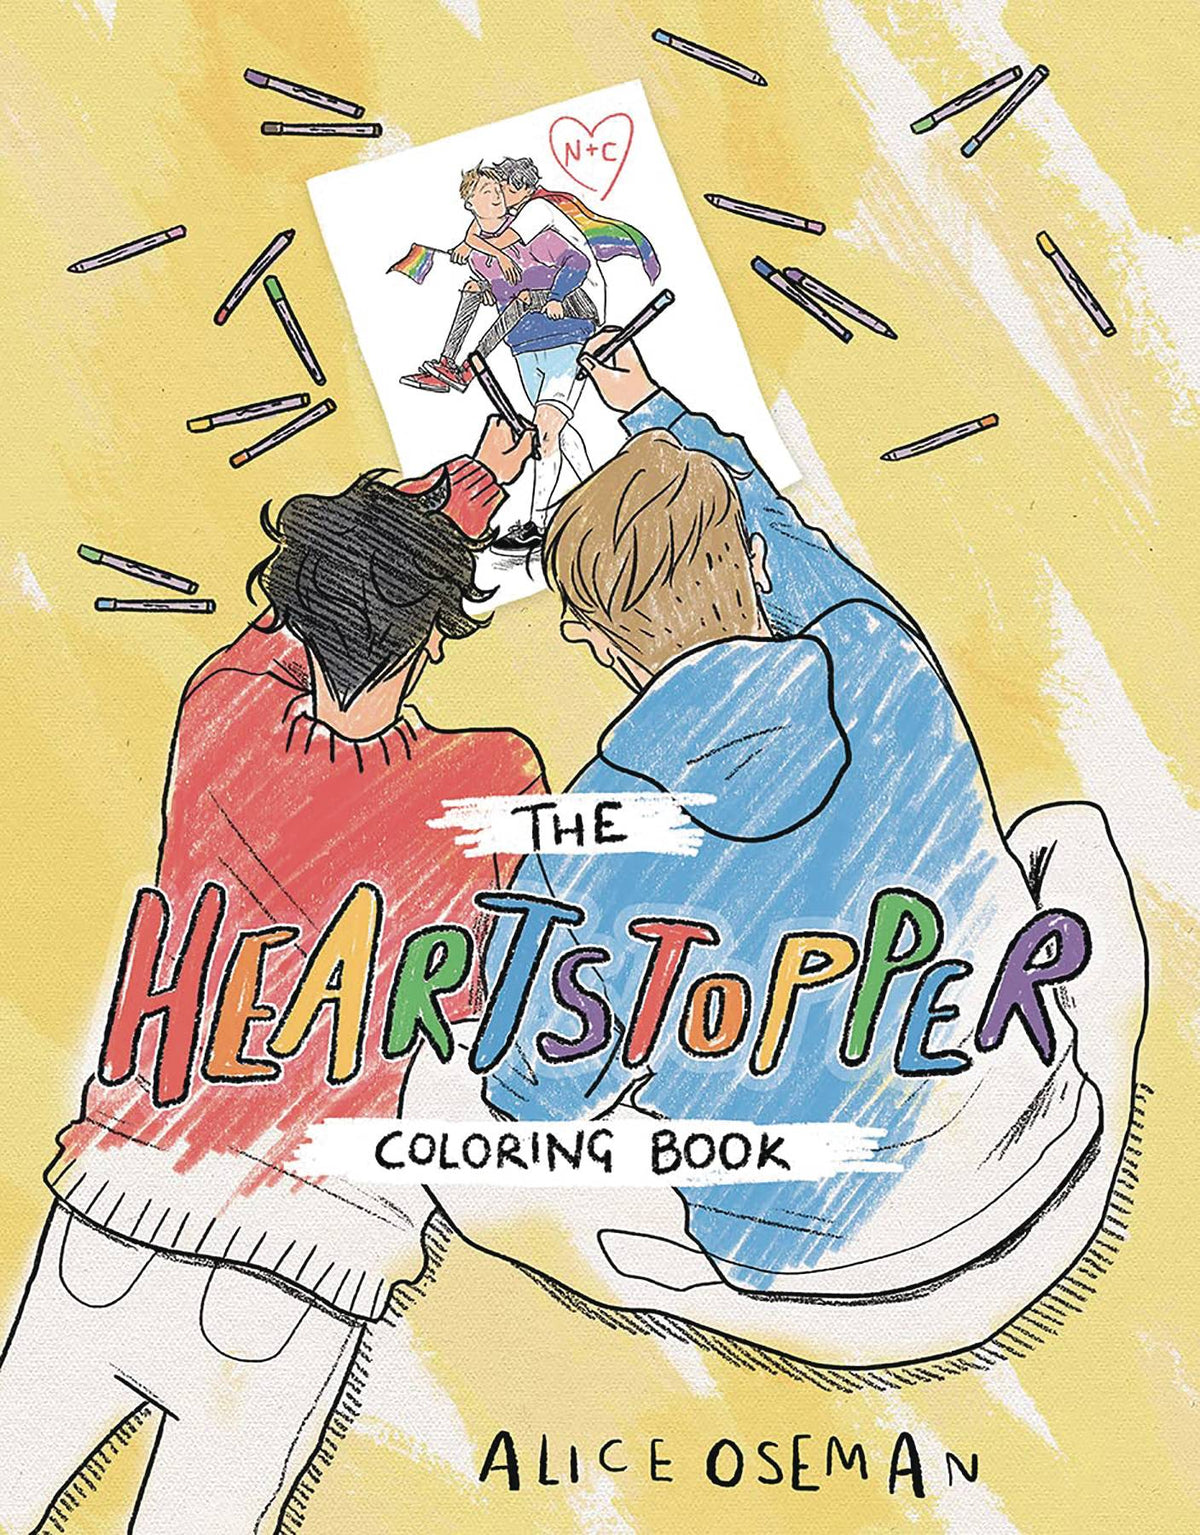 HEARTSTOPPER OFFICIAL COLORING BOOK - Third Eye